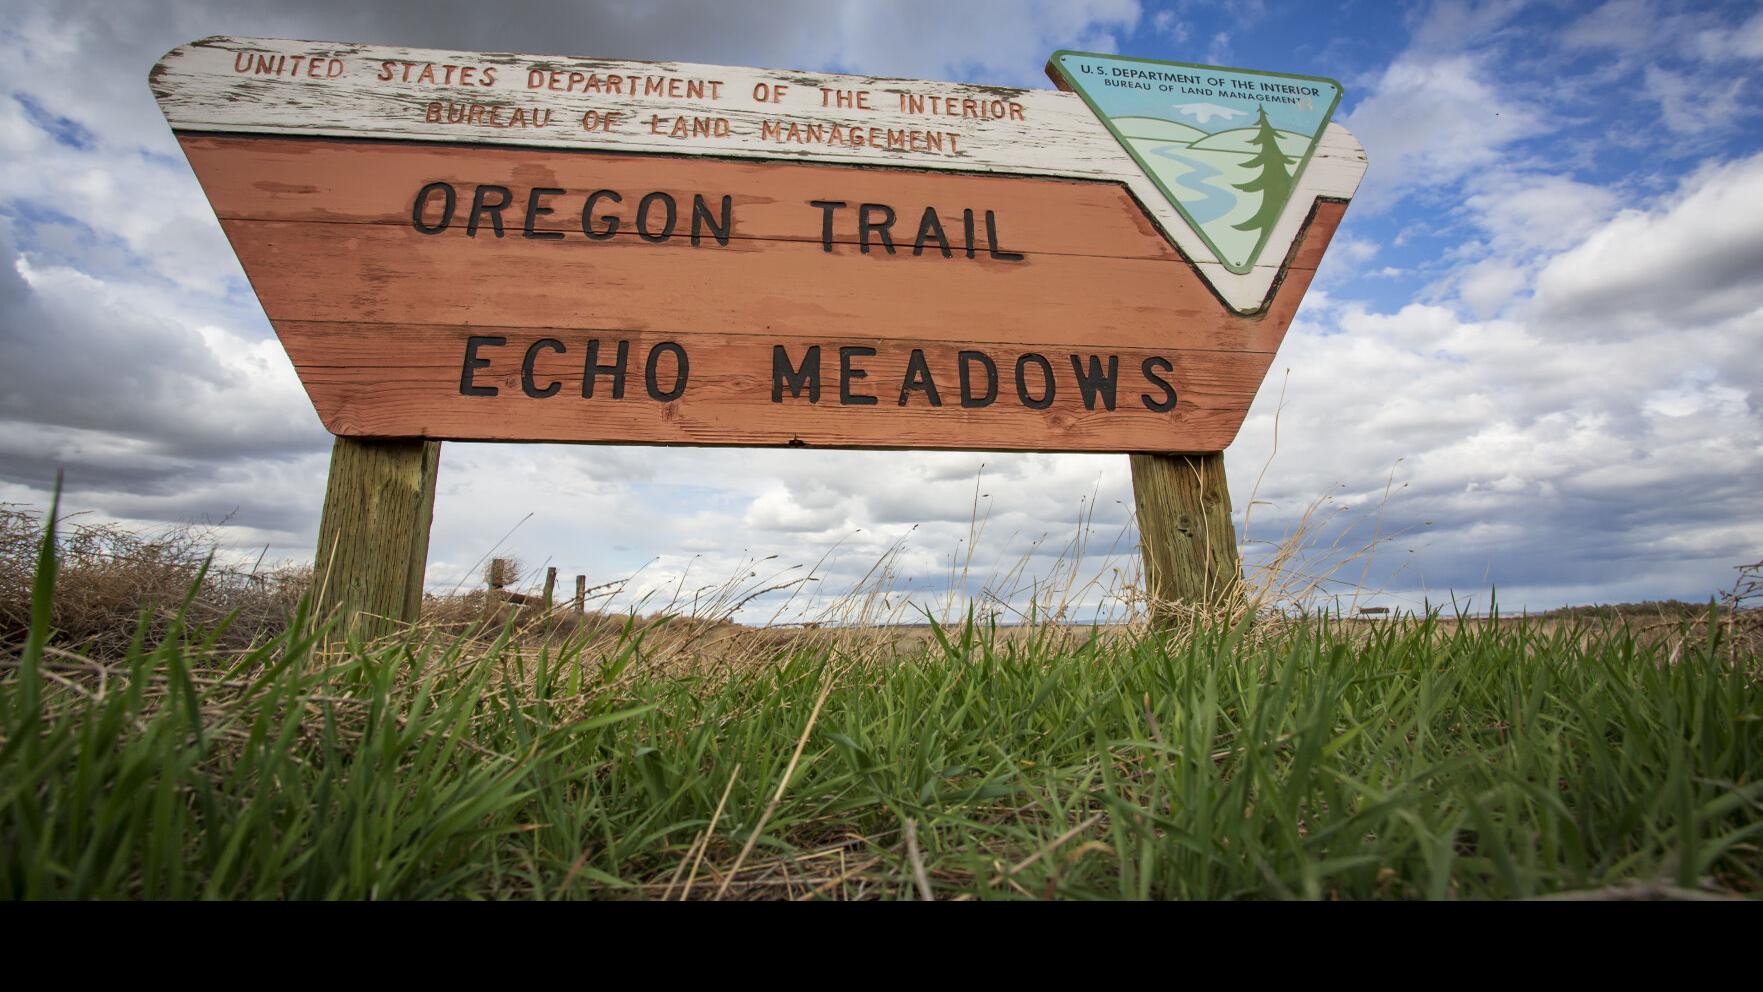 Following the path of the Oregon Trail, Articles